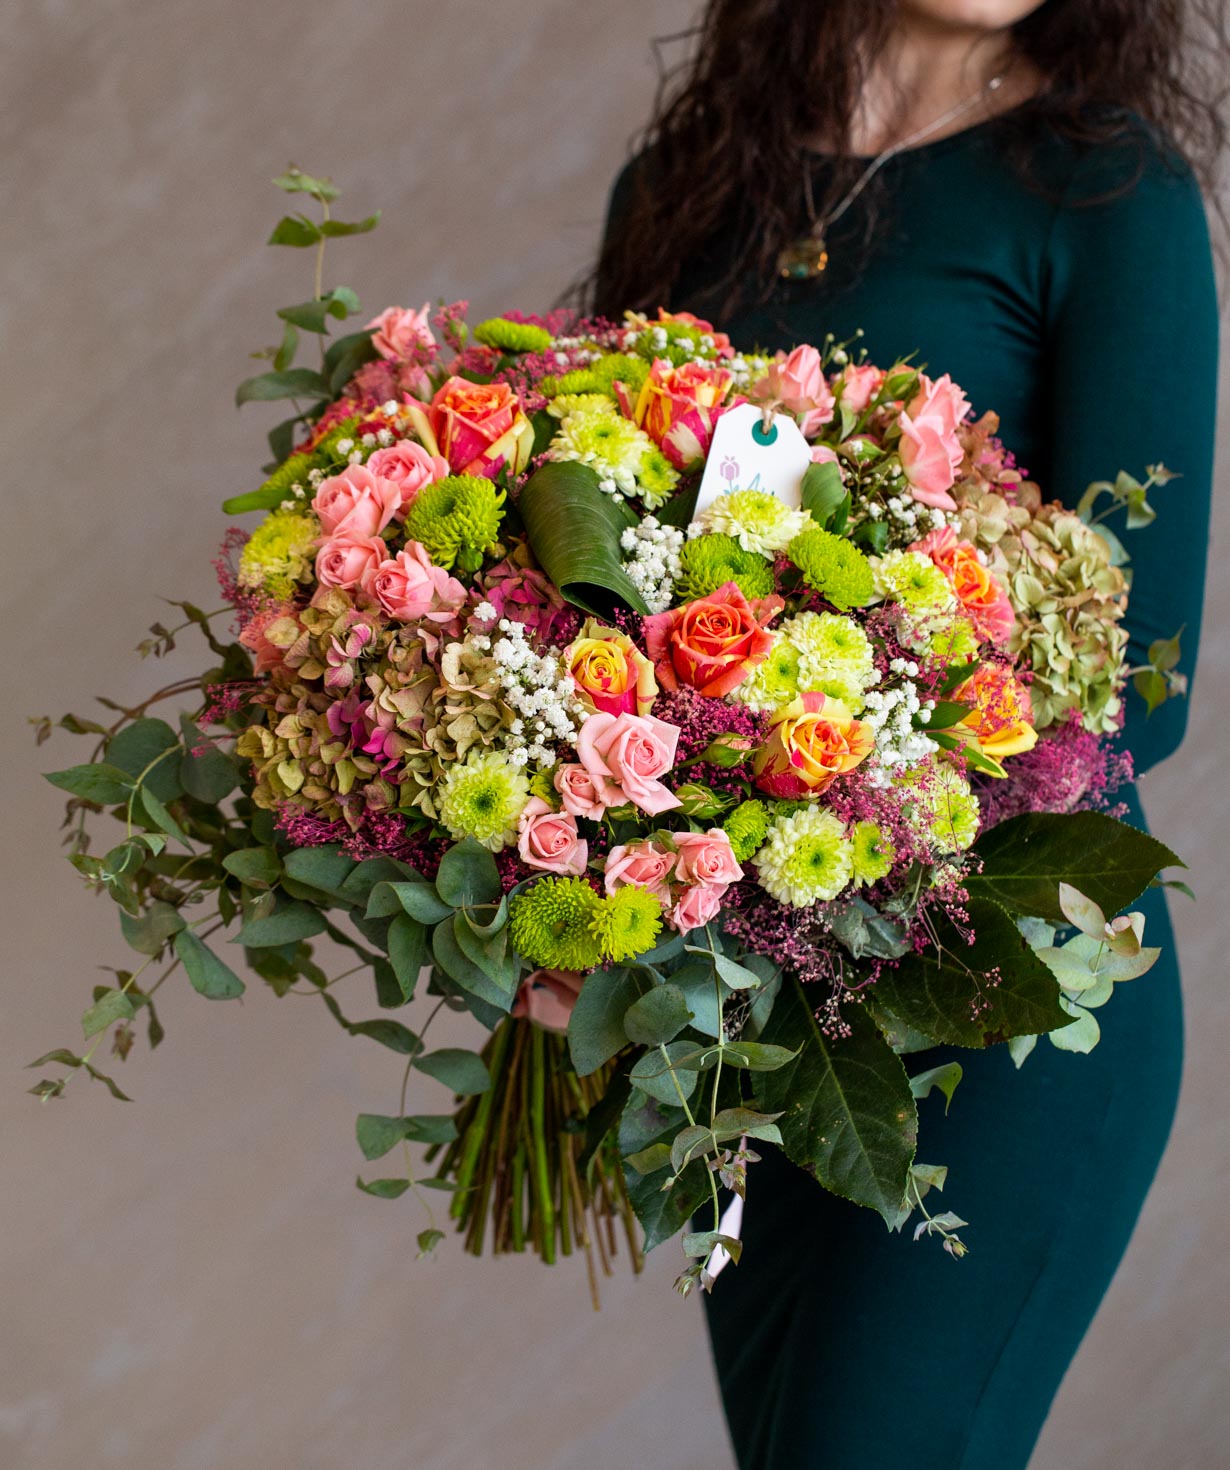 Bouquet `North Bay` with roses, hydrangeas and chrysanthemums